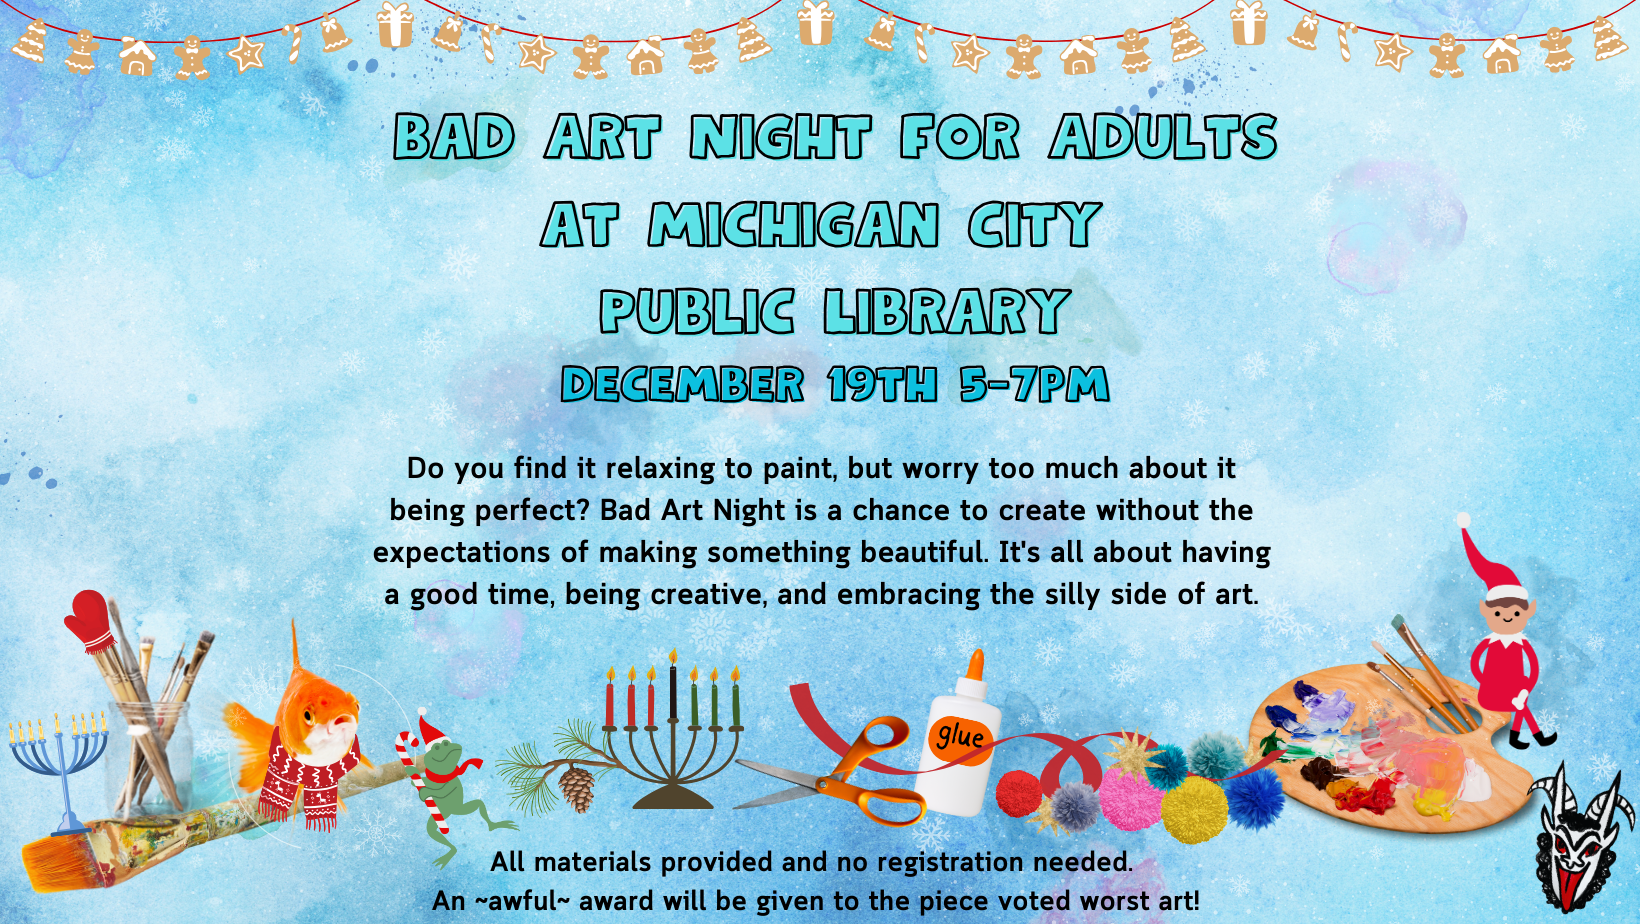 Bad Art Night for Adults - Michigan City Public Library